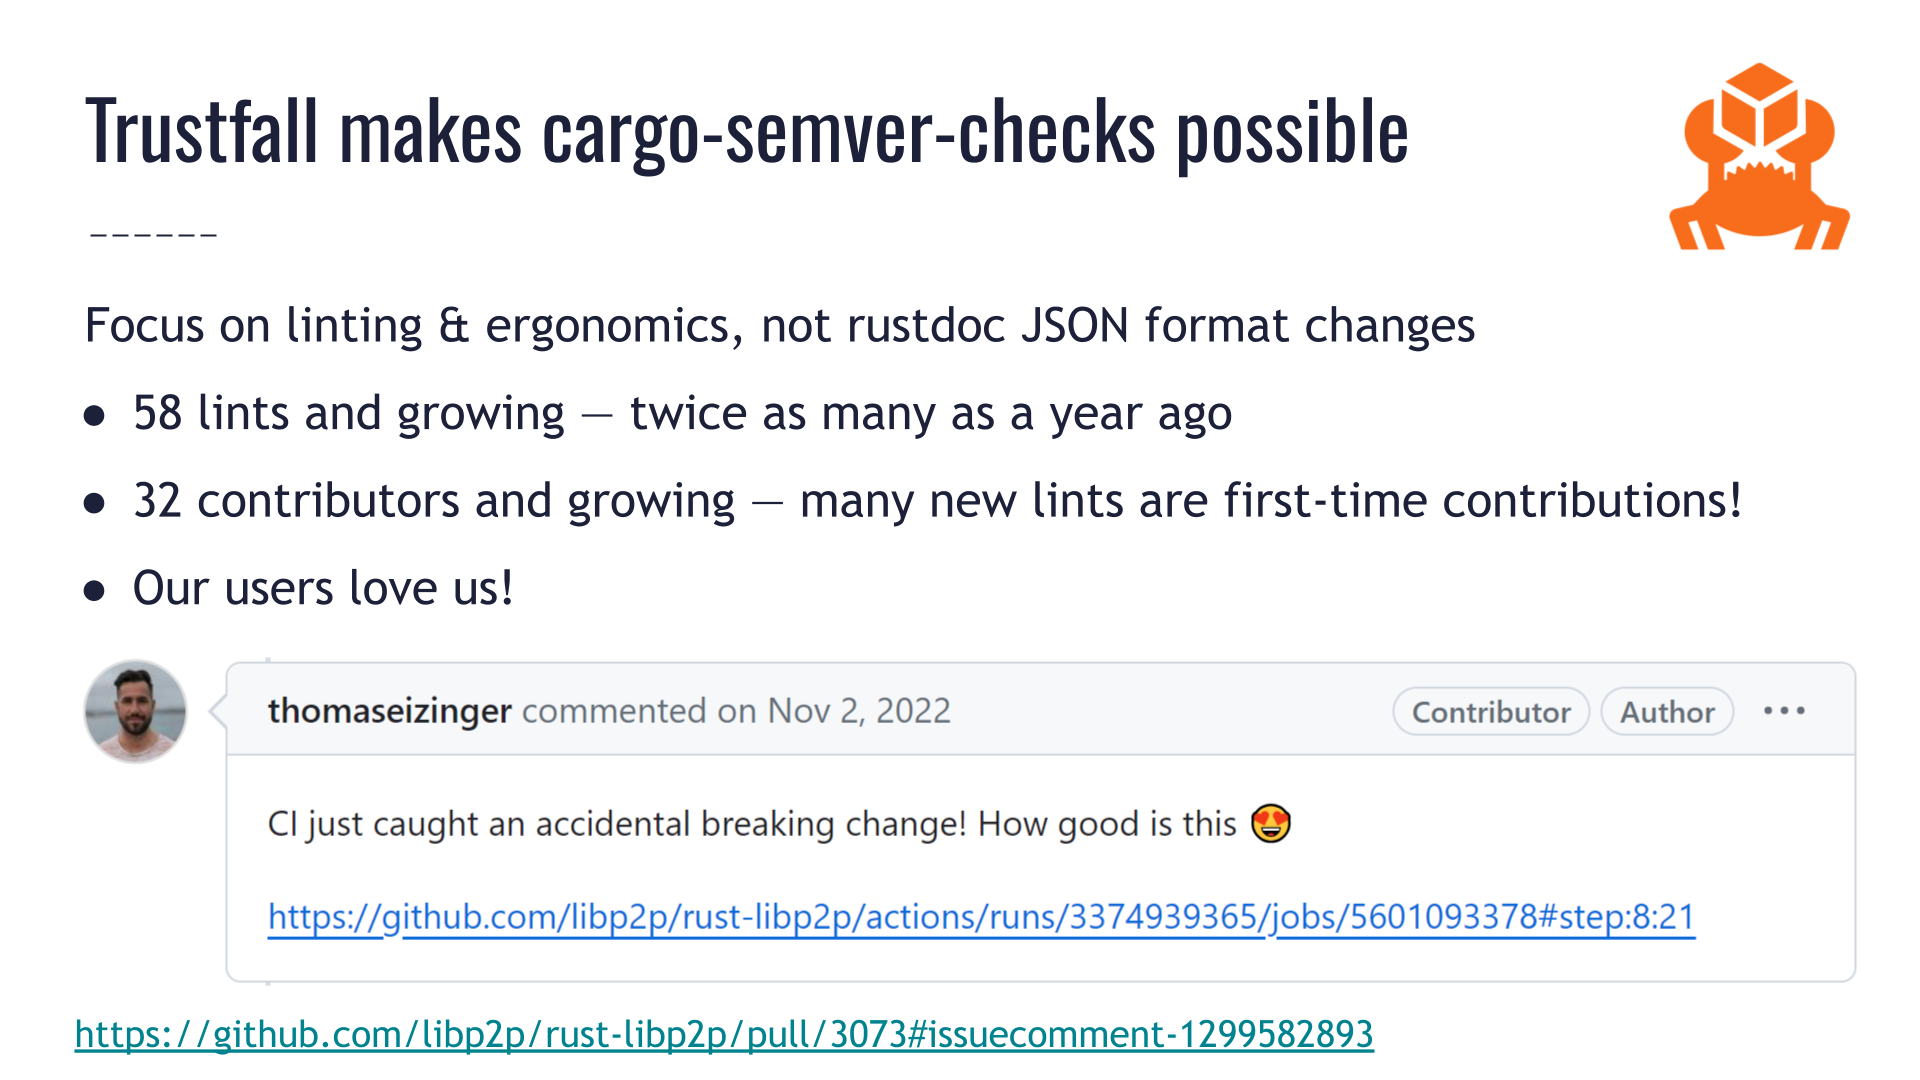 Slide titled: "Trustfall makes cargo-semver-checks possible." The slide has the following text: "Focus on linting and ergonomics, not rustdoc JSON format changes. 58 lints and growing — twice as many as a year ago. 32 contributors and growing — many new lints are first-time contributions! Our users love us!" Below this text is a screenshot of a GitHub comment from user "thomaseizinger" saying: "CI just caught an accidental breaking change! How good is this 😍"